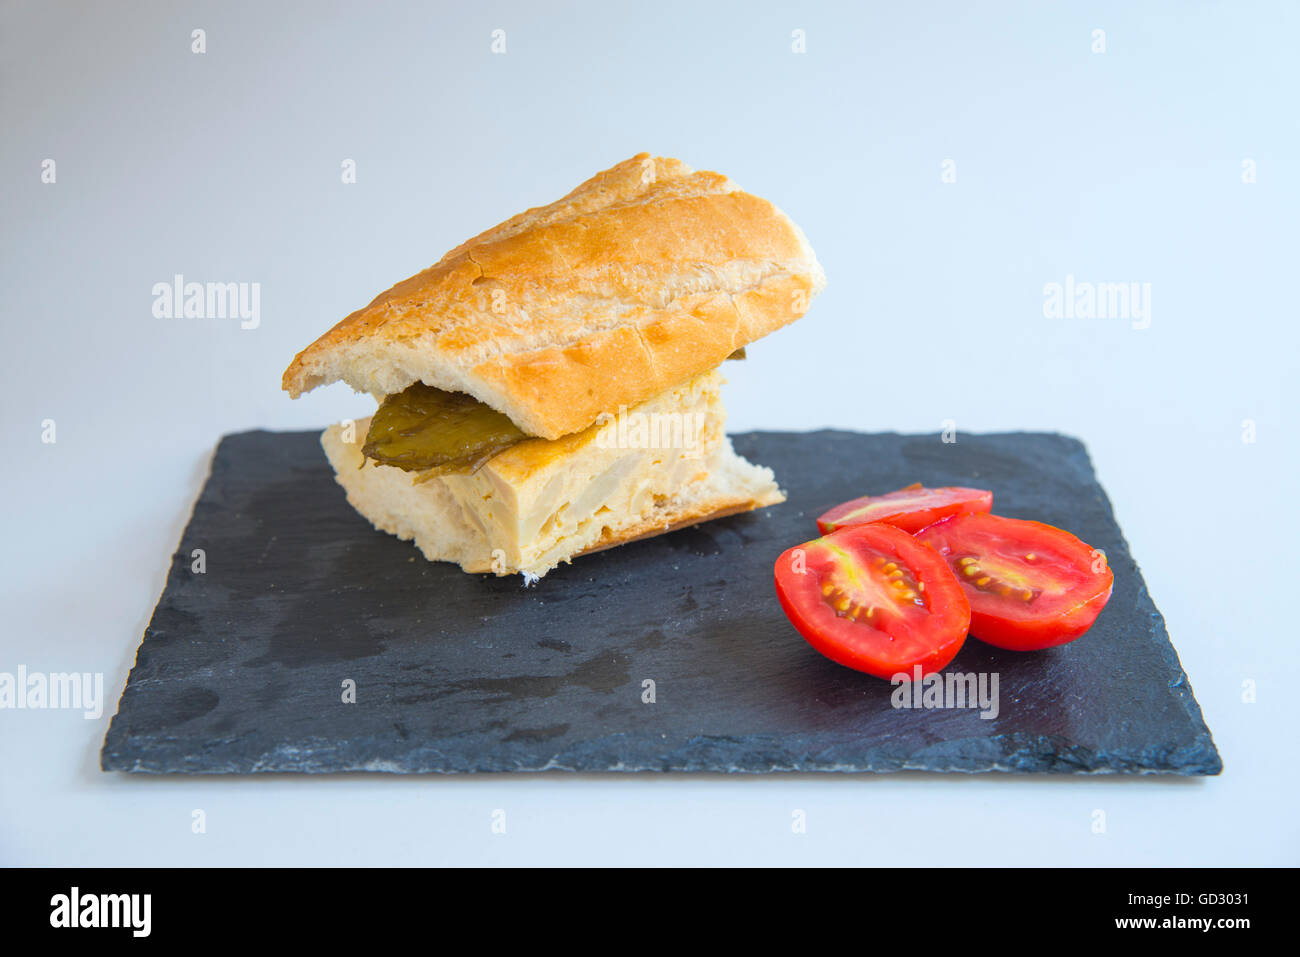 Sandwich made of Spanish omelet and pepper with cherry tomatoes. Stock Photo